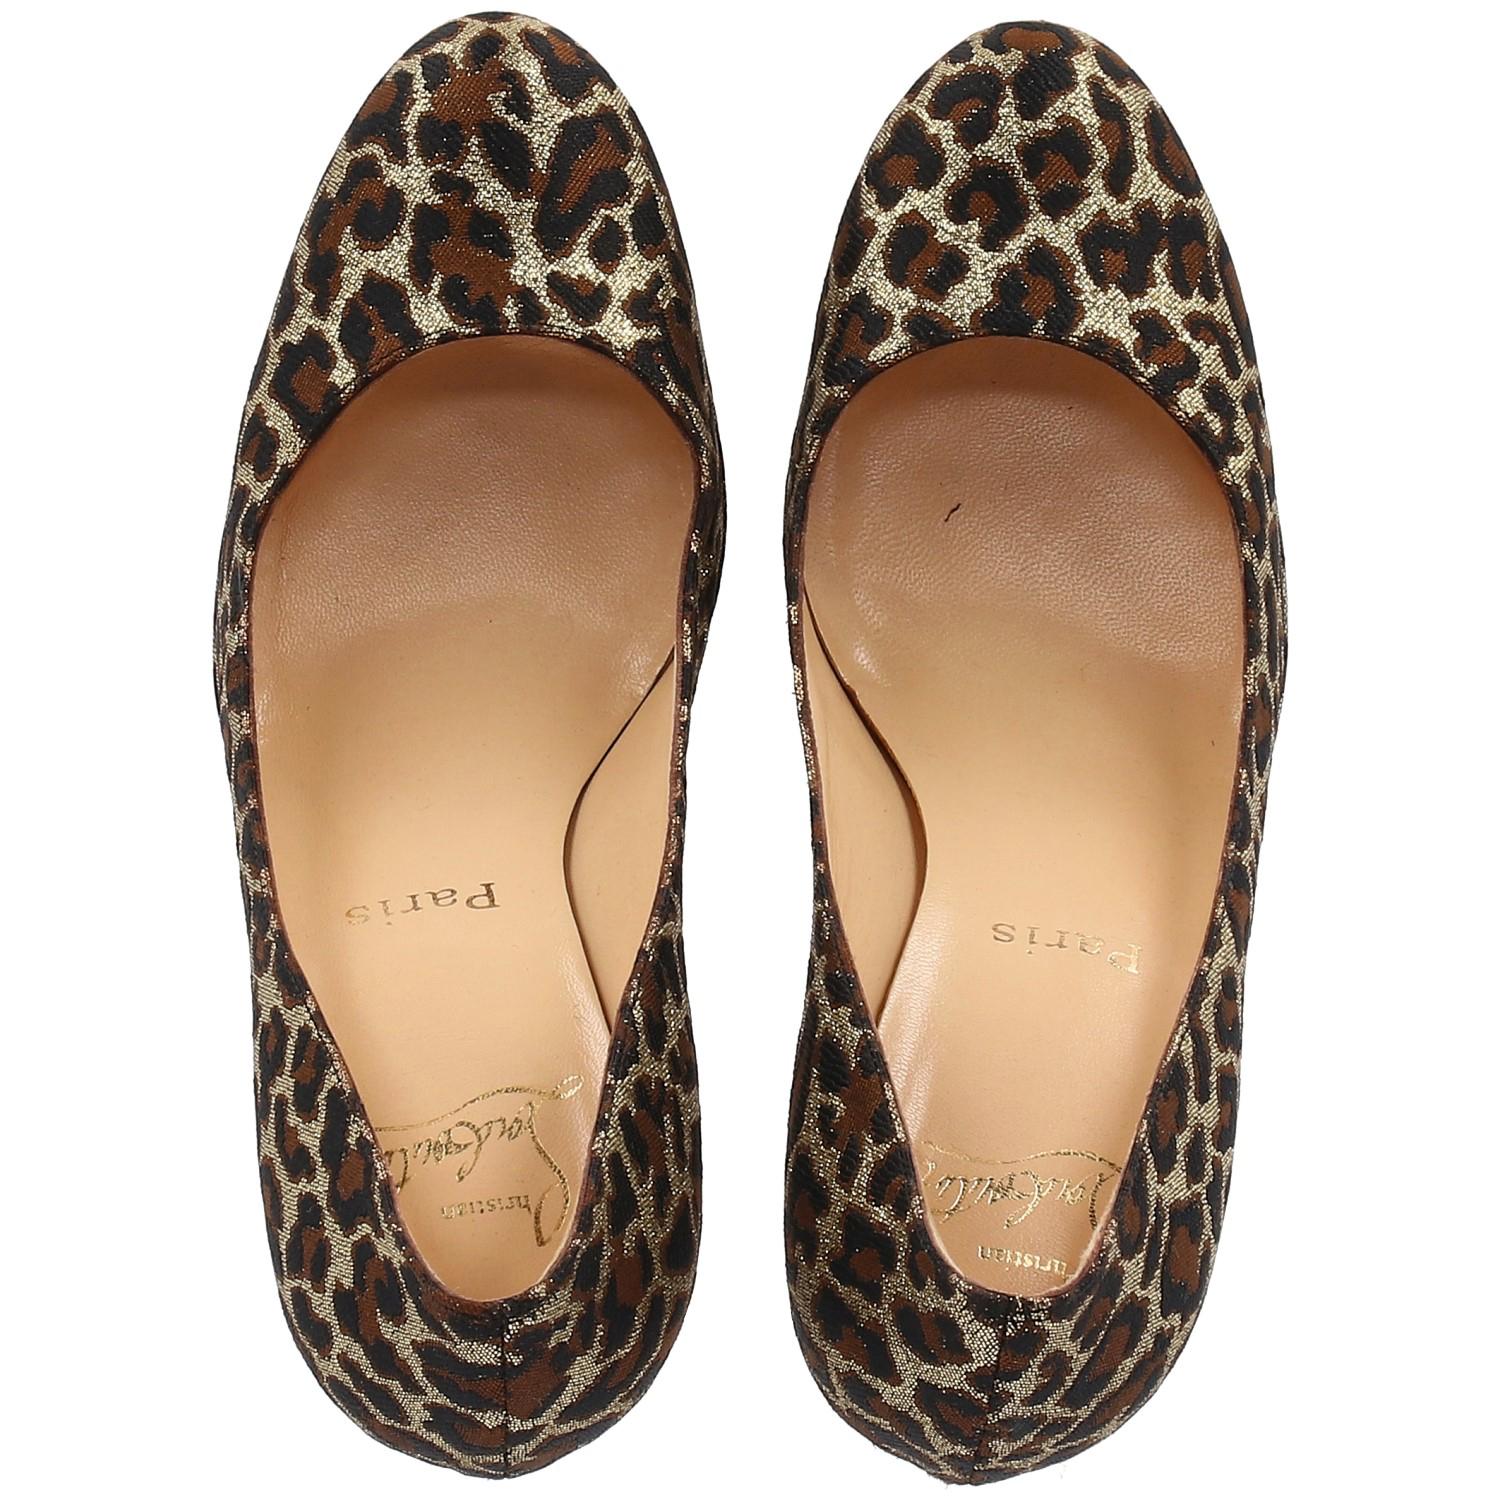 The stylish Christian Louboutin brown black and gold animalier printed lurex leather decolleté features round toes and 11cm stiletto heels.  
Made in Italy
Years: 200s

Size: 38.5

Heels: 11 cm
Plateau: 1 cm
Insole: 25 cm

